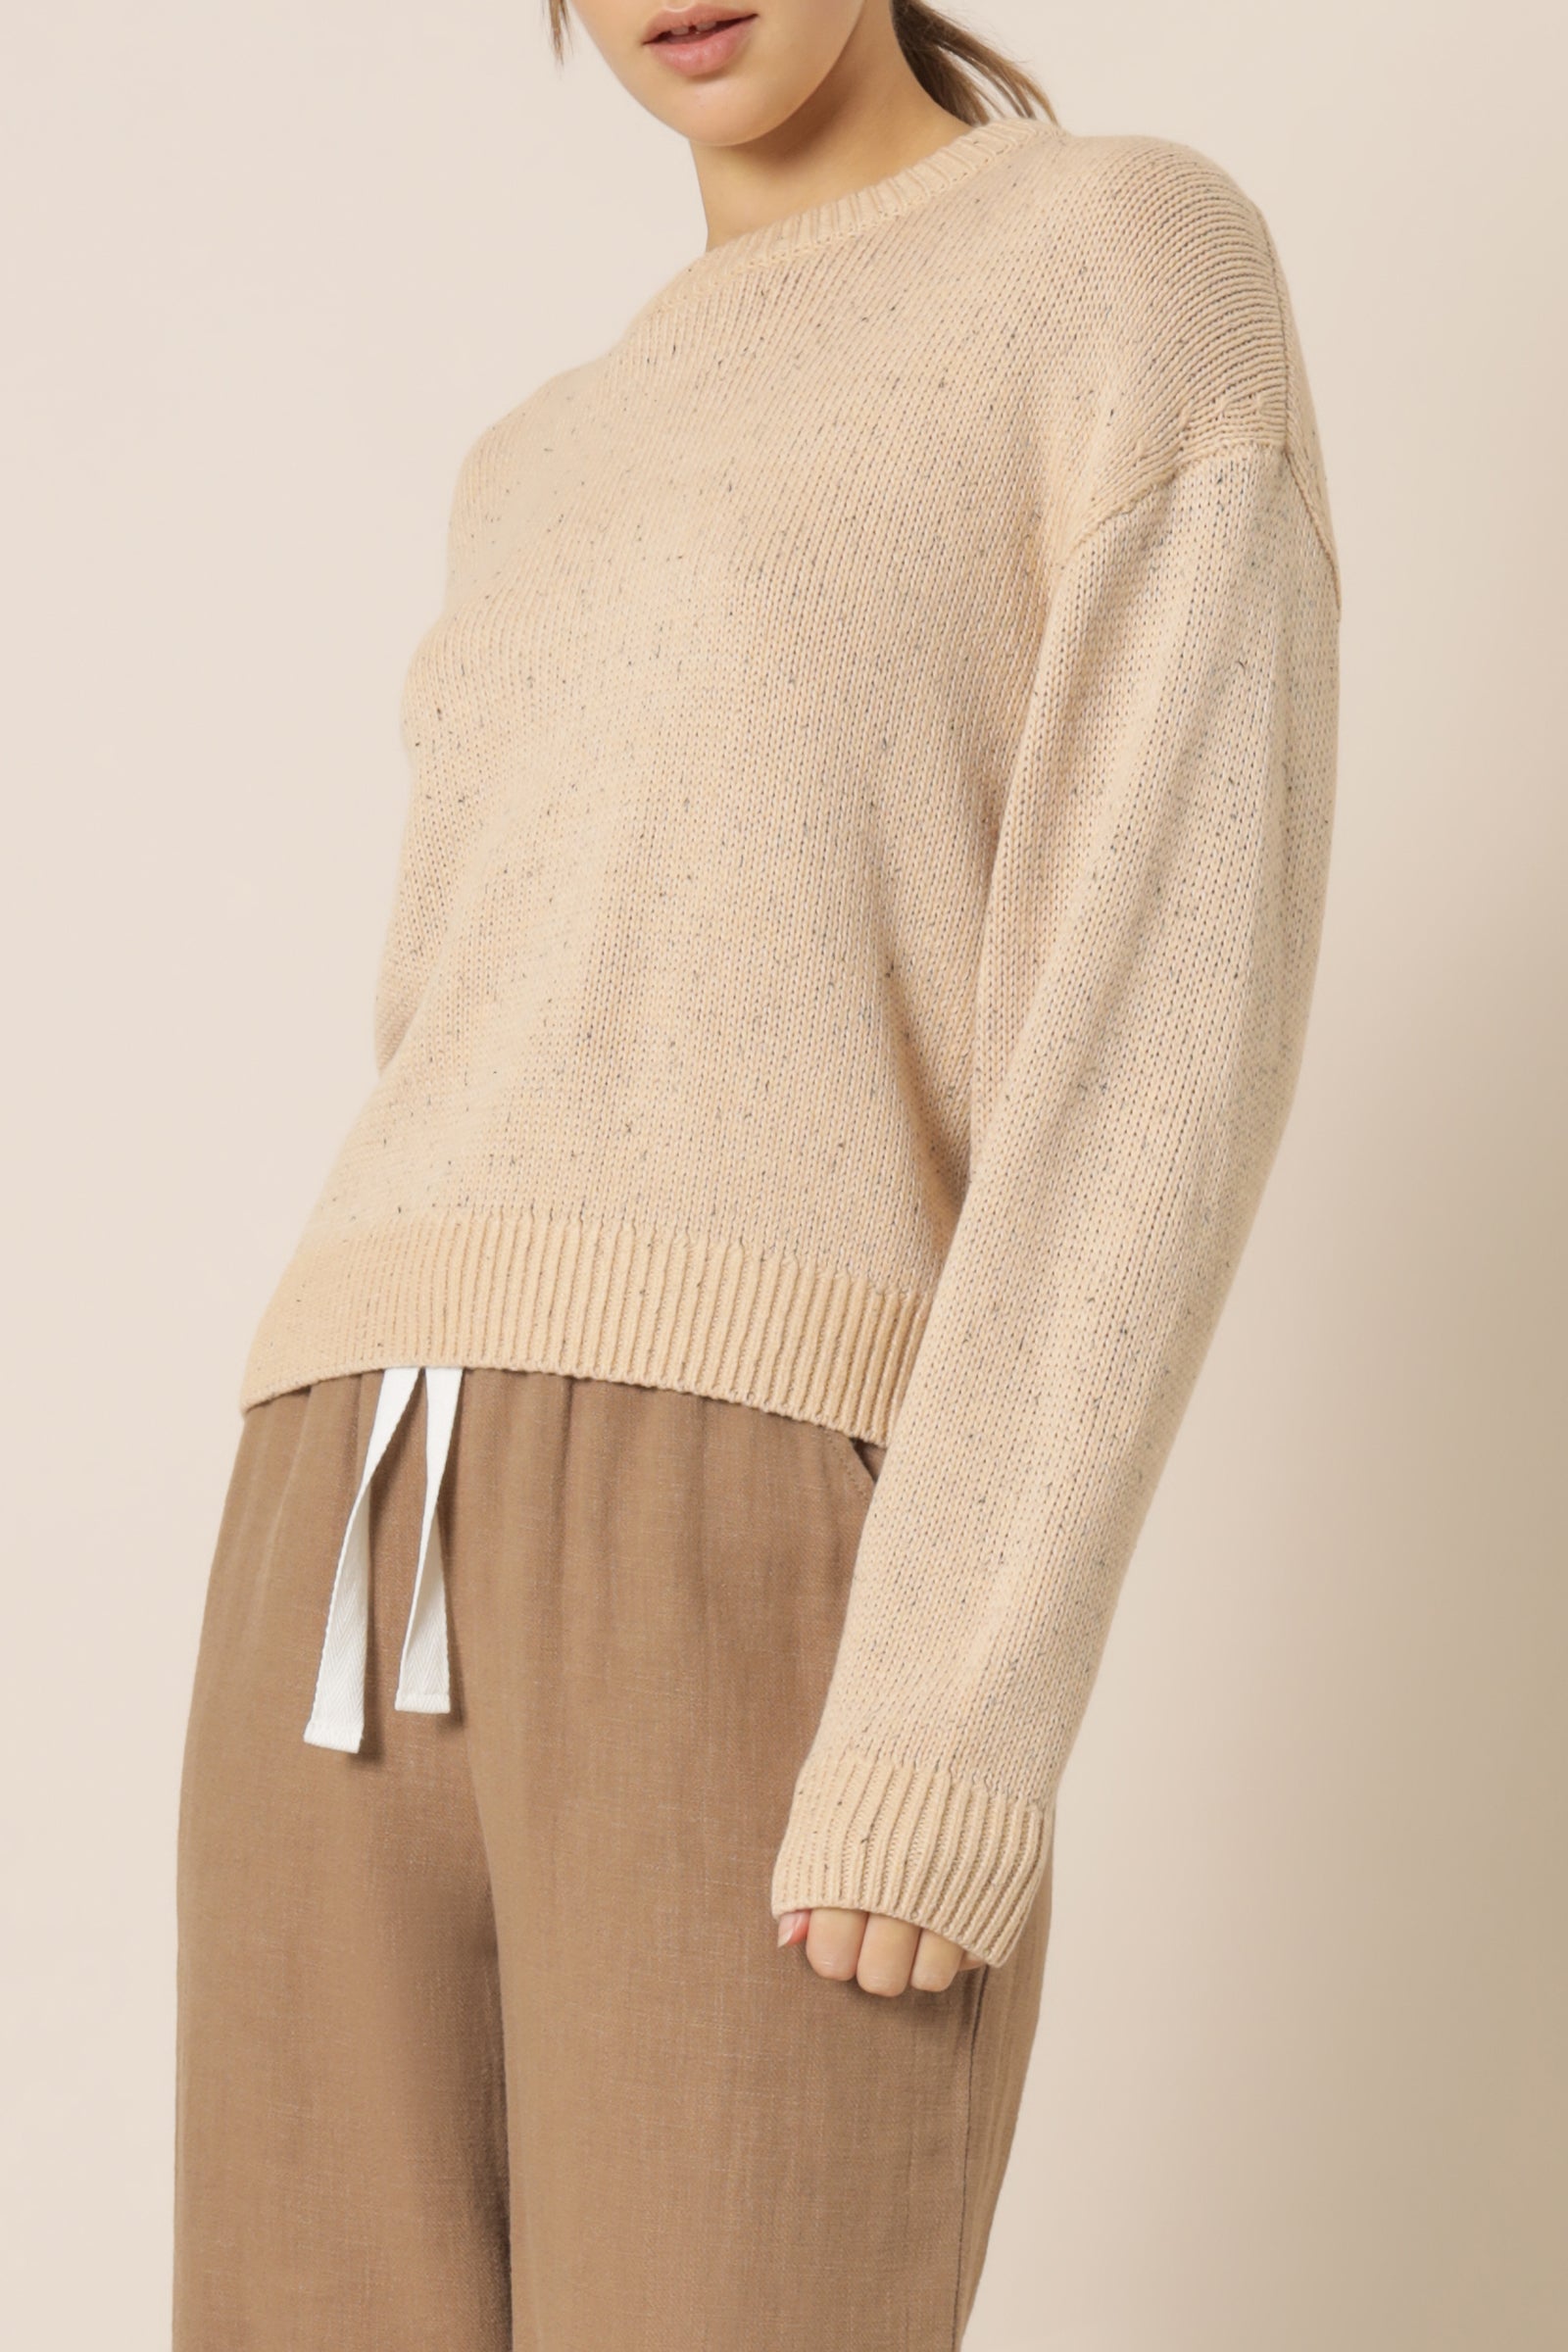 Nude Lucy lennon speckle knit honey speckle knits